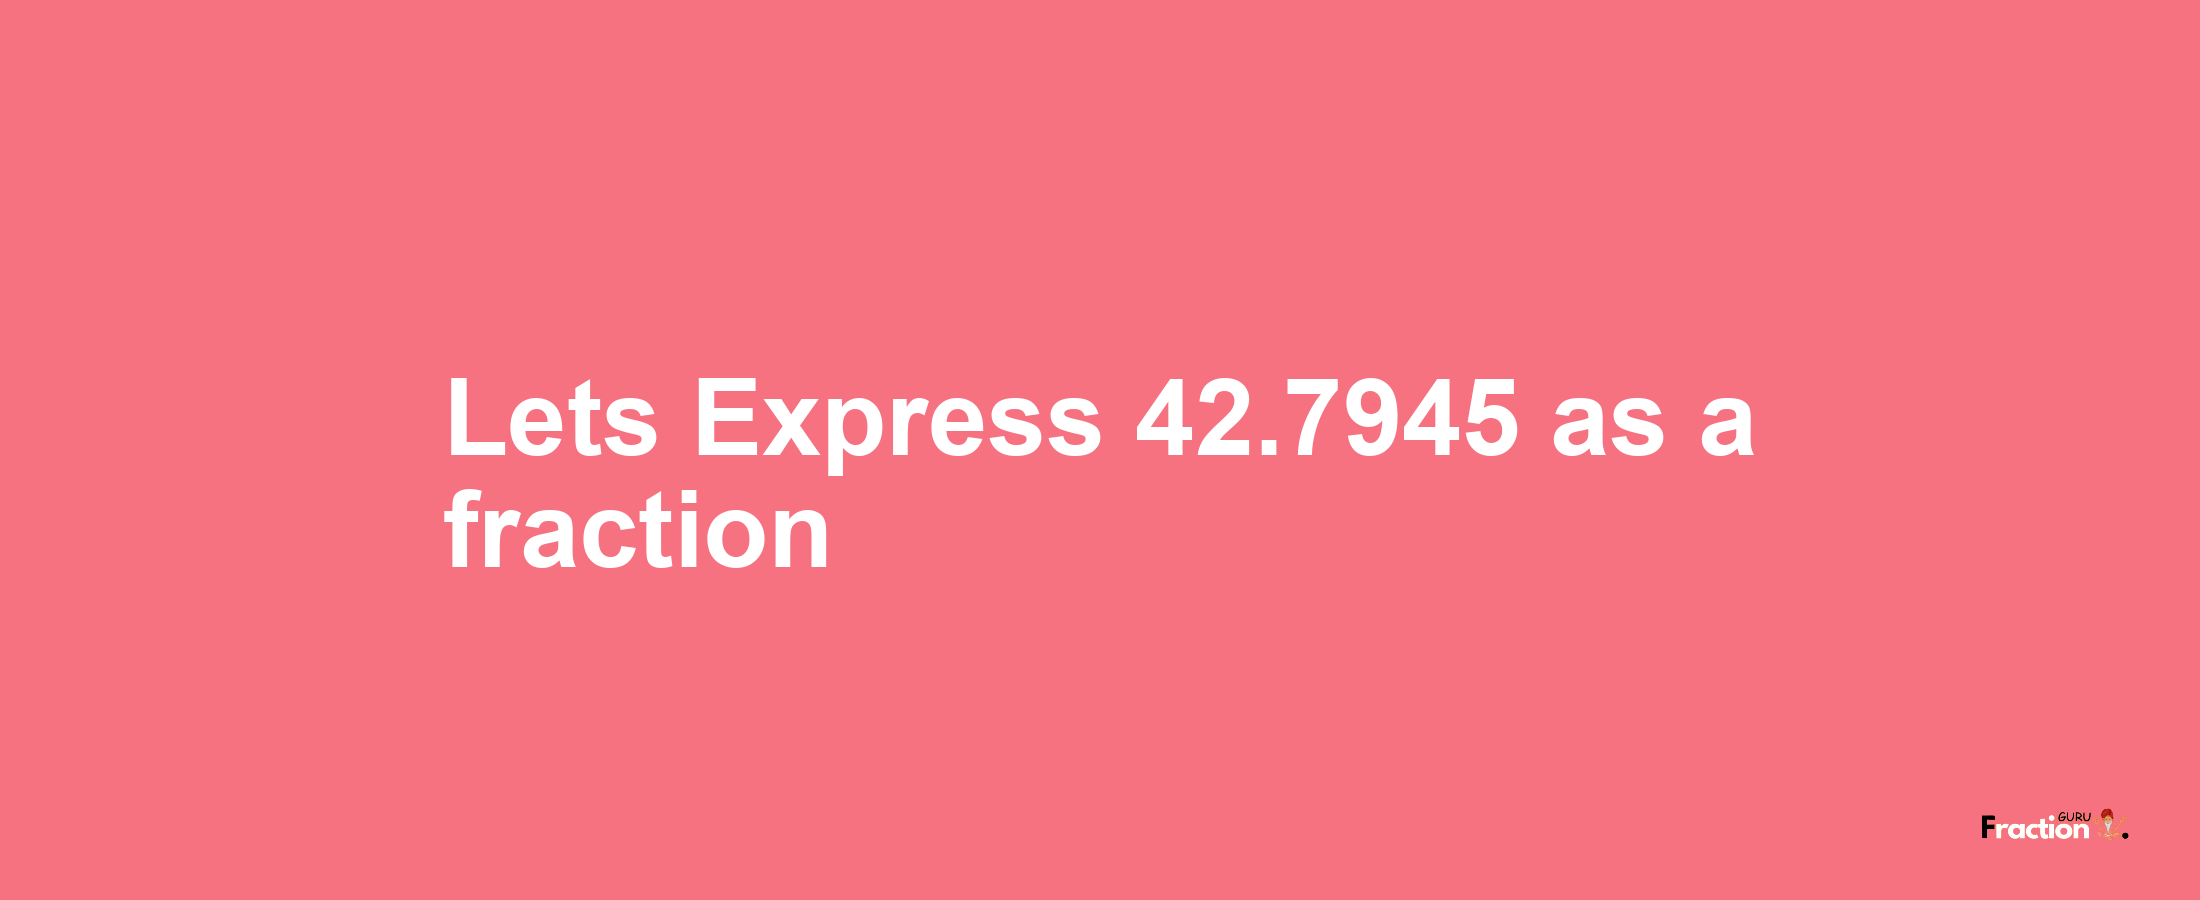 Lets Express 42.7945 as afraction